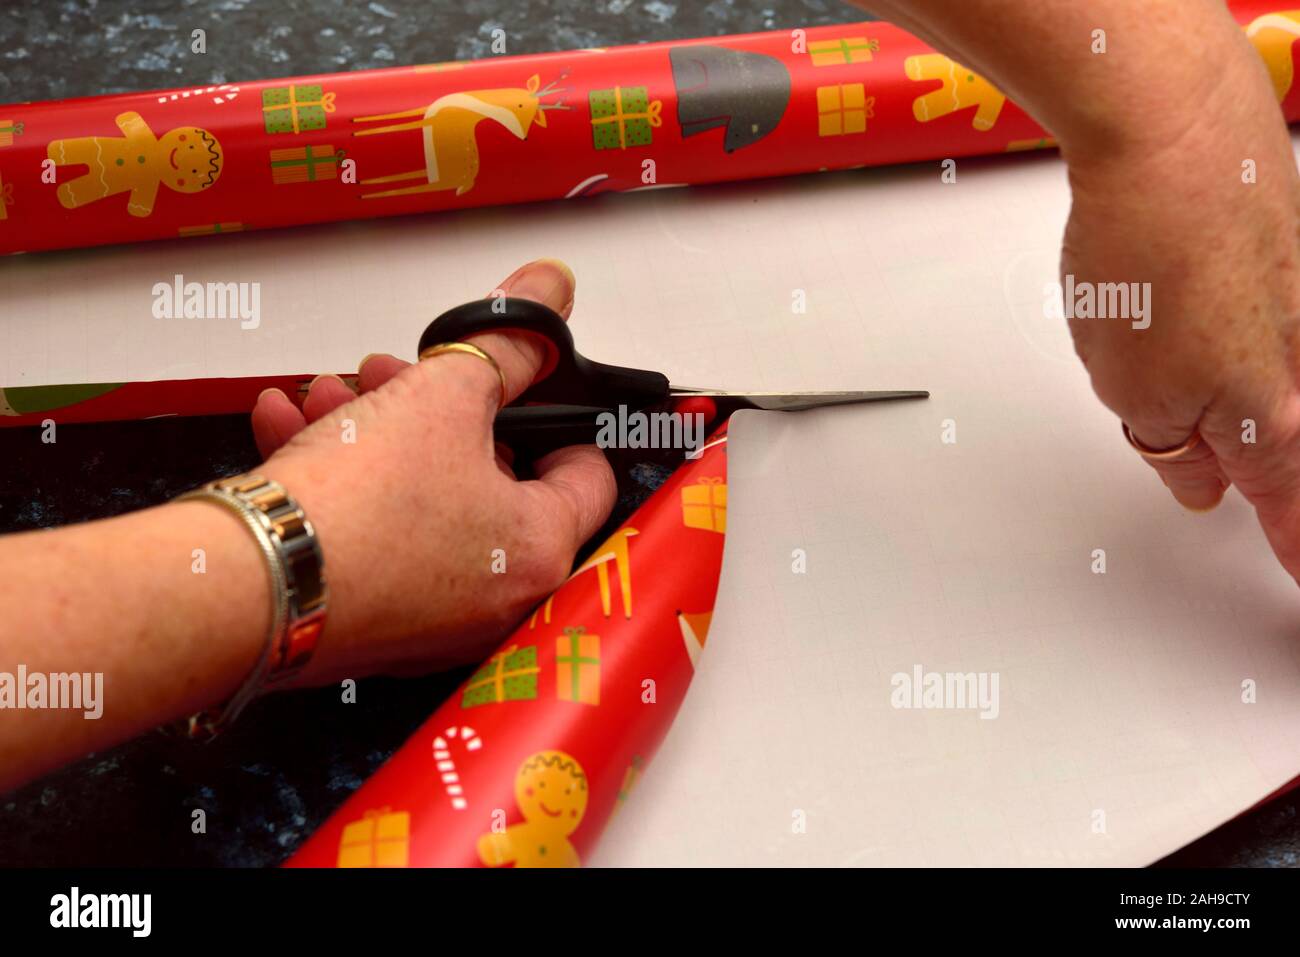 Woman's hands using scissors to cut Christmas wrapping paper Stock Photo -  Alamy